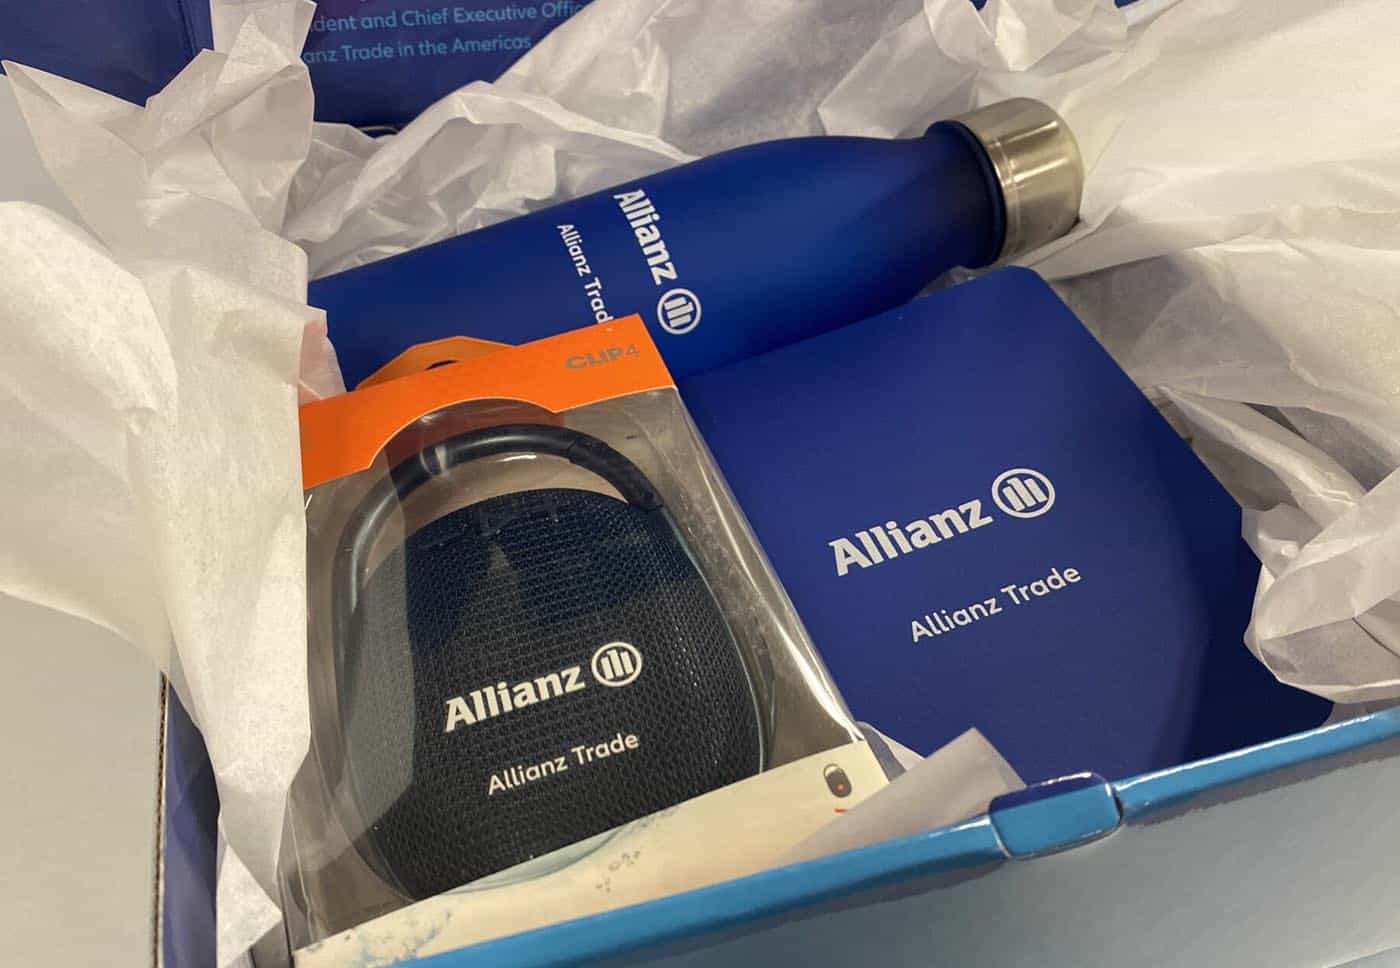 Allianz Trade promo box kitted with branded promotional products